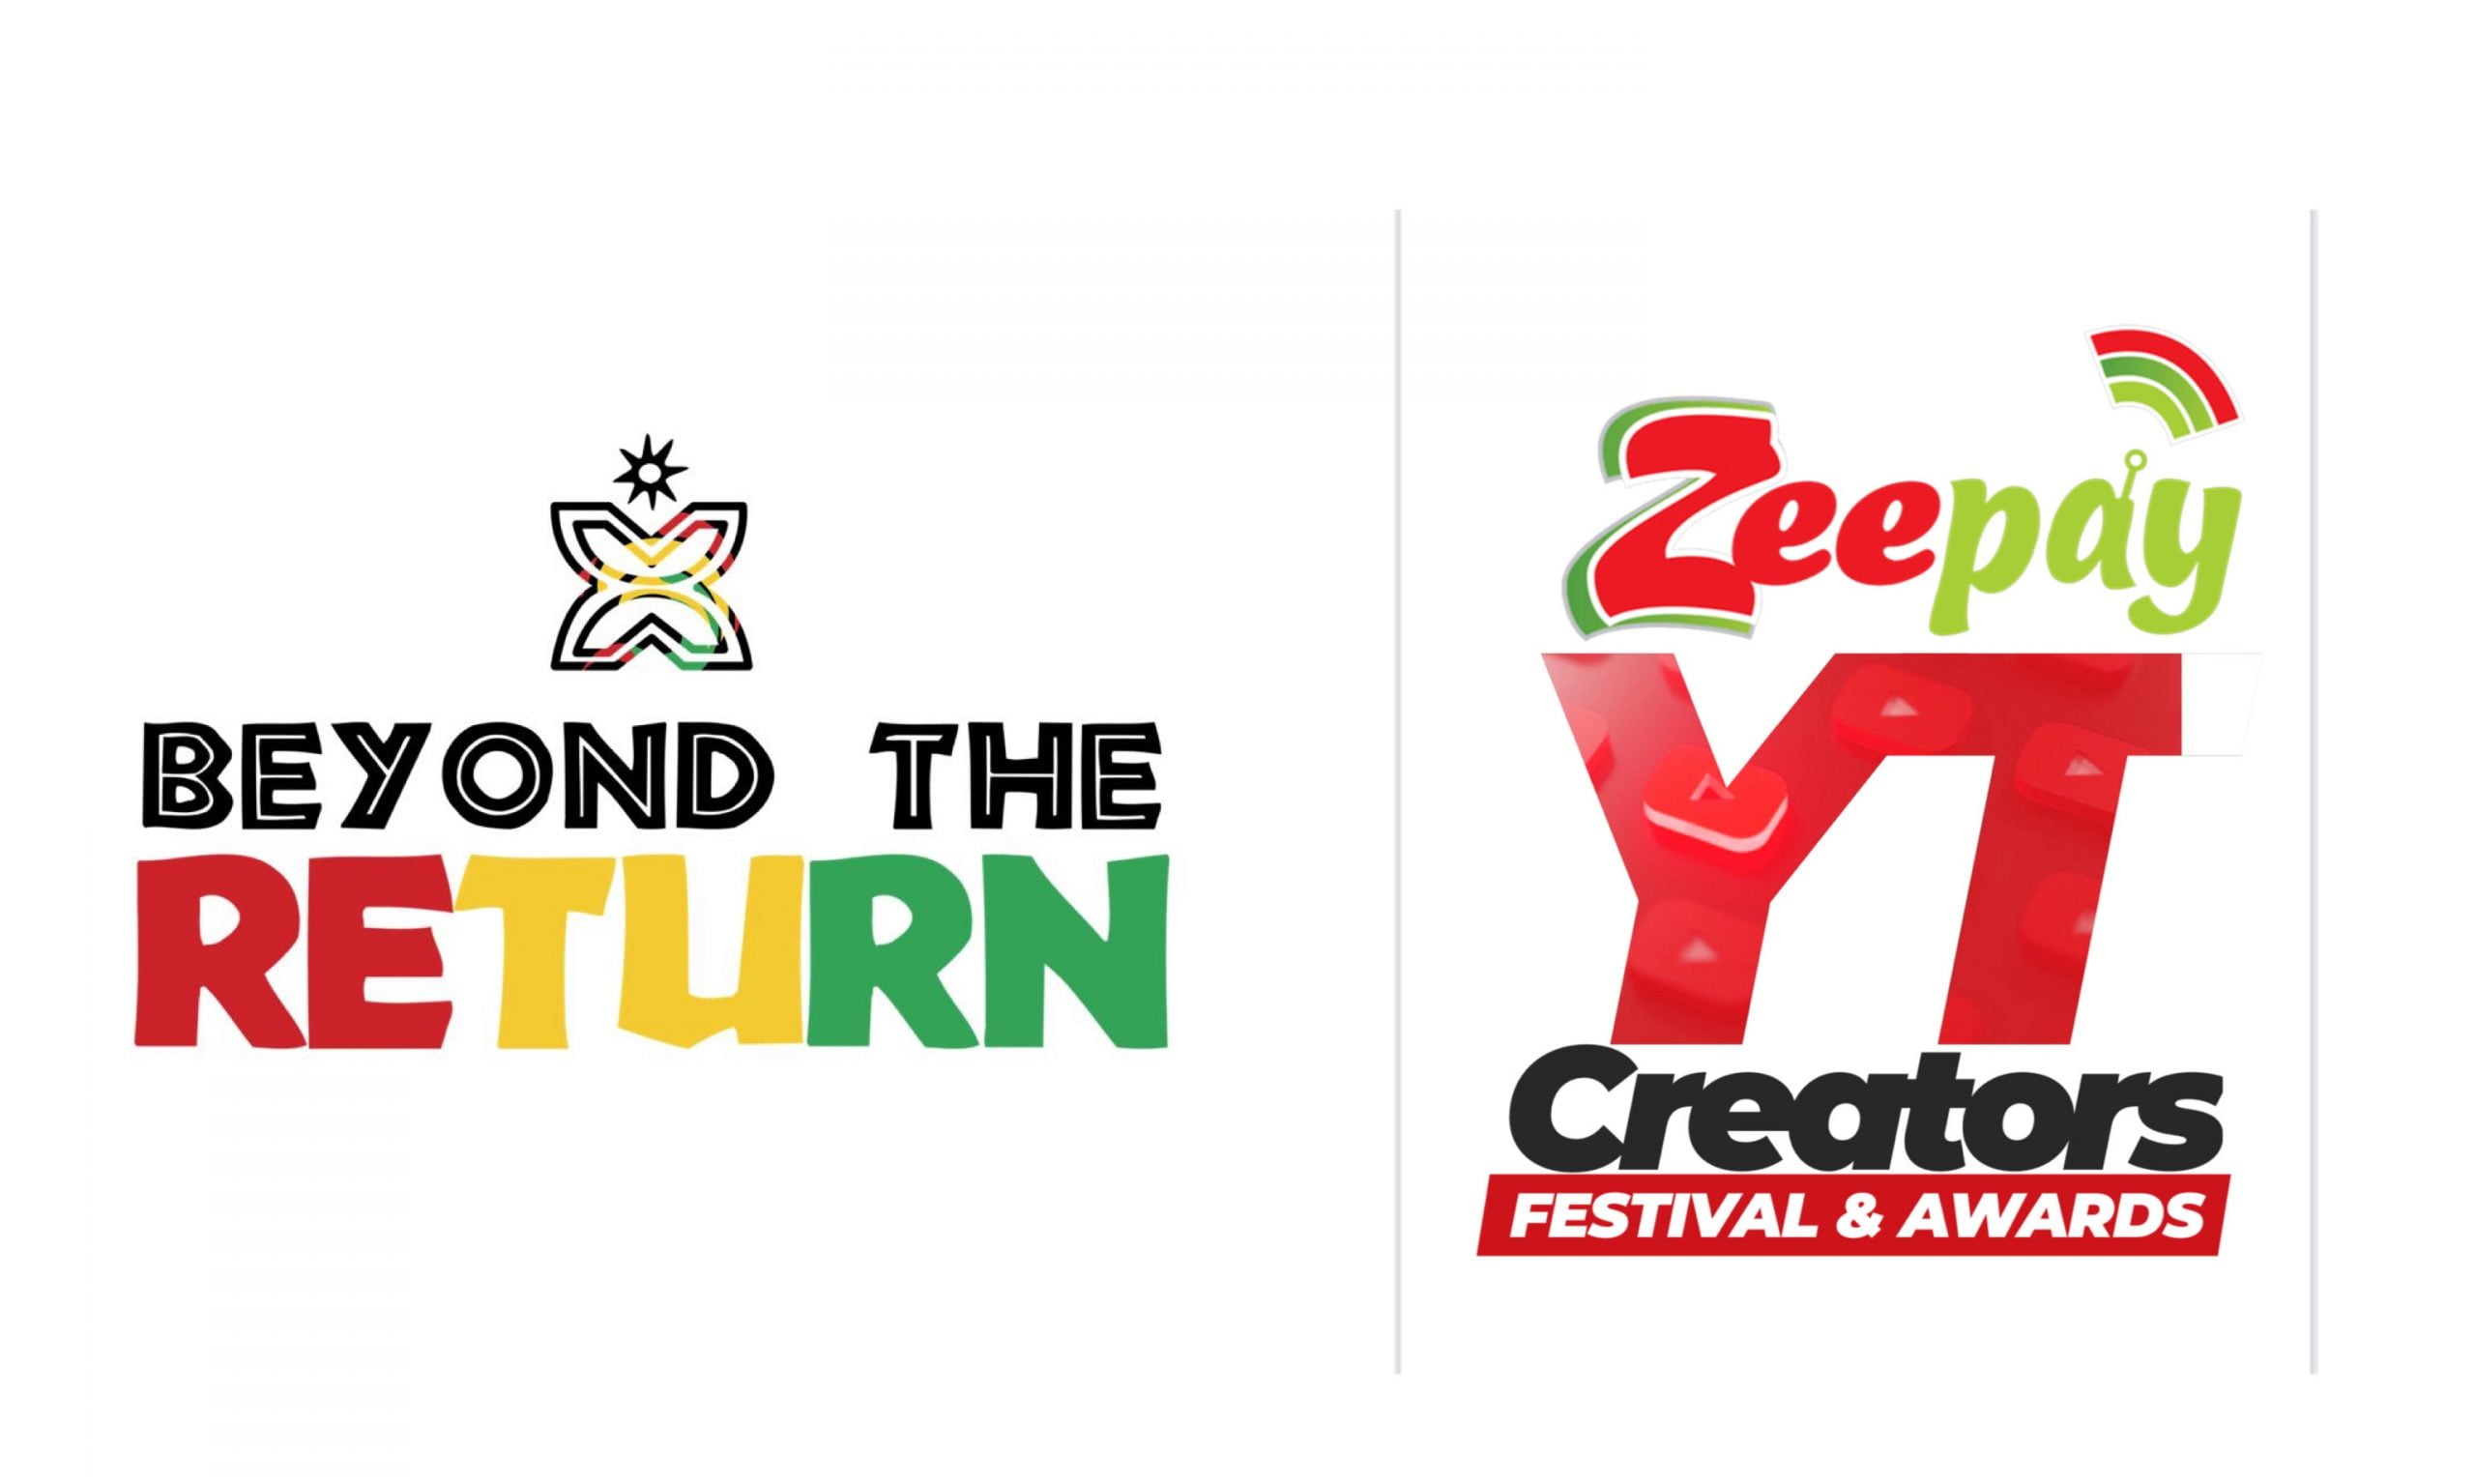 ZEEPAY YT CREATORS FESTIVAL APPROVED AS AN OFFICIAL BEYOND THE RETURN EVENT